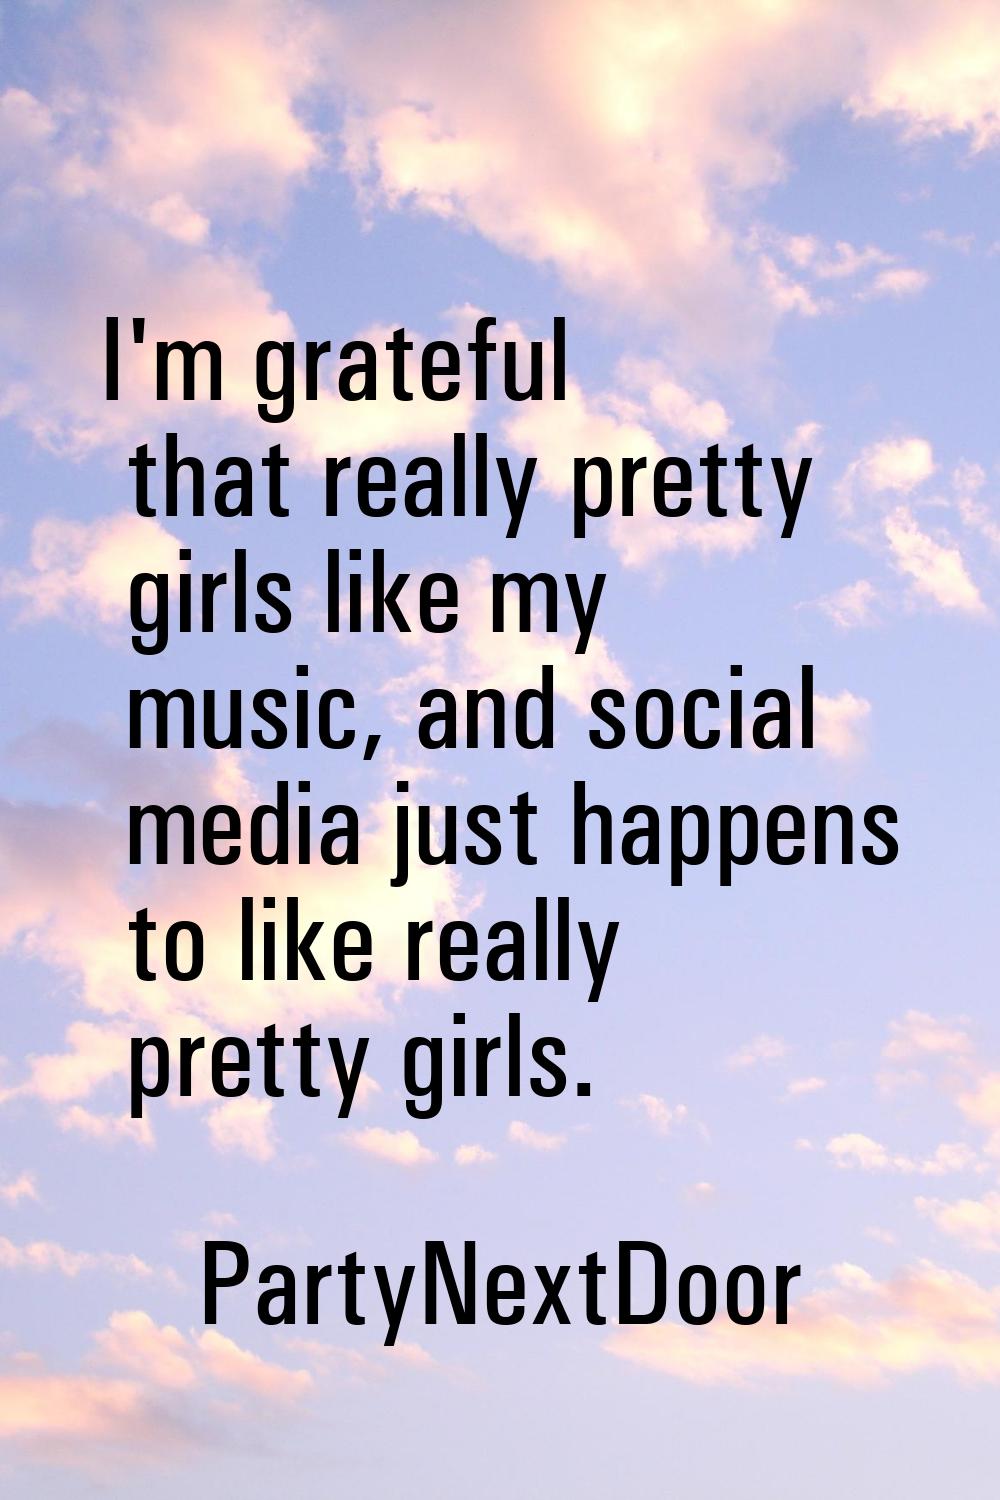 I'm grateful that really pretty girls like my music, and social media just happens to like really p